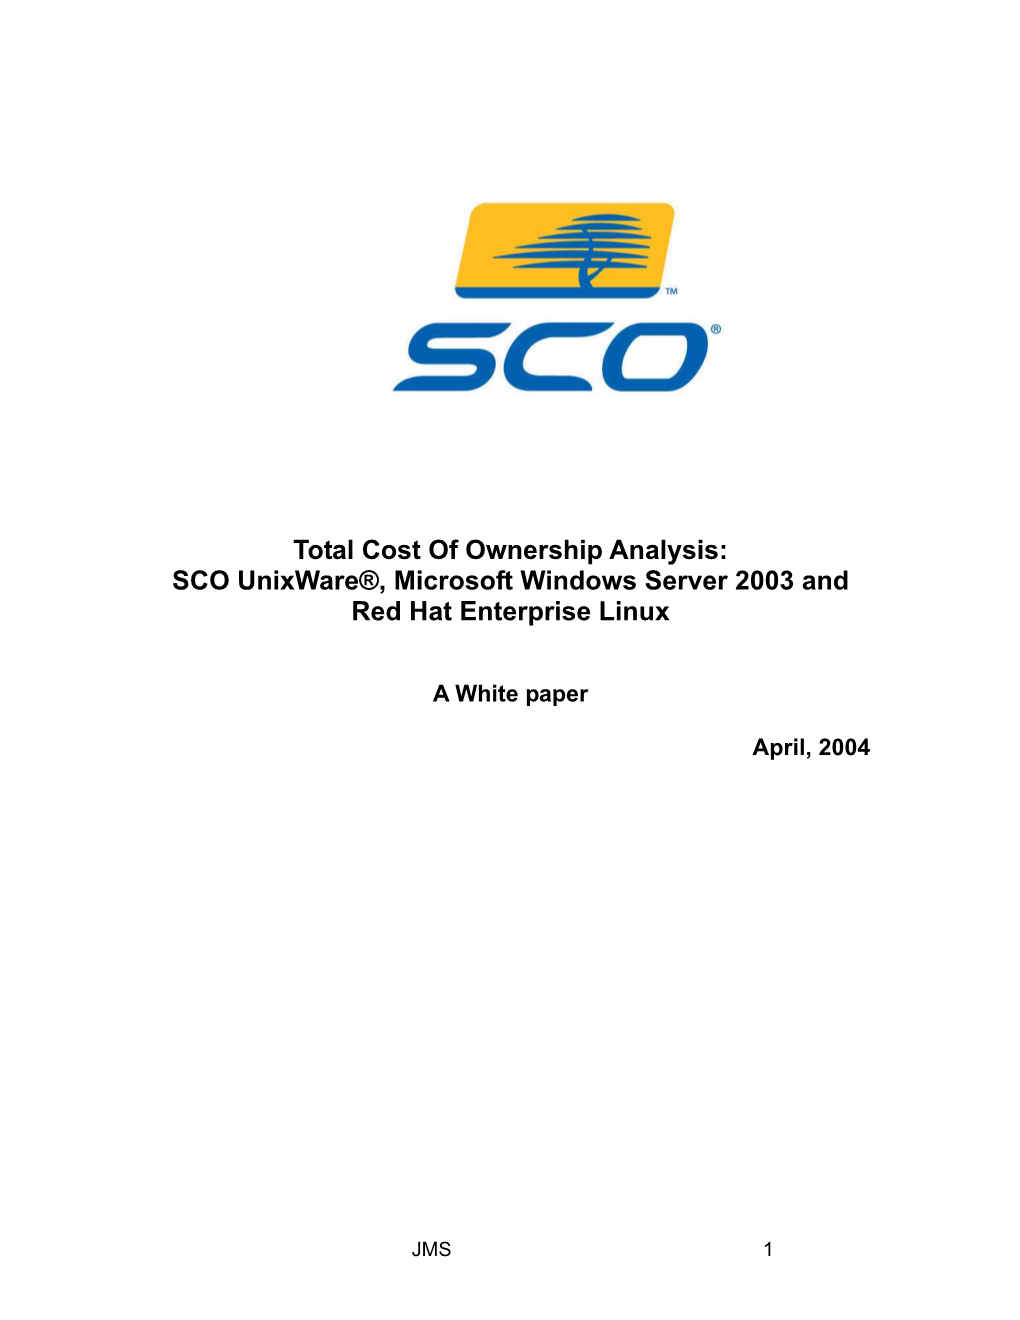 Total Cost of Ownership Analysis: SCO Unixware®, Microsoft Windows Server 2003 and Red Hat Enterprise Linux